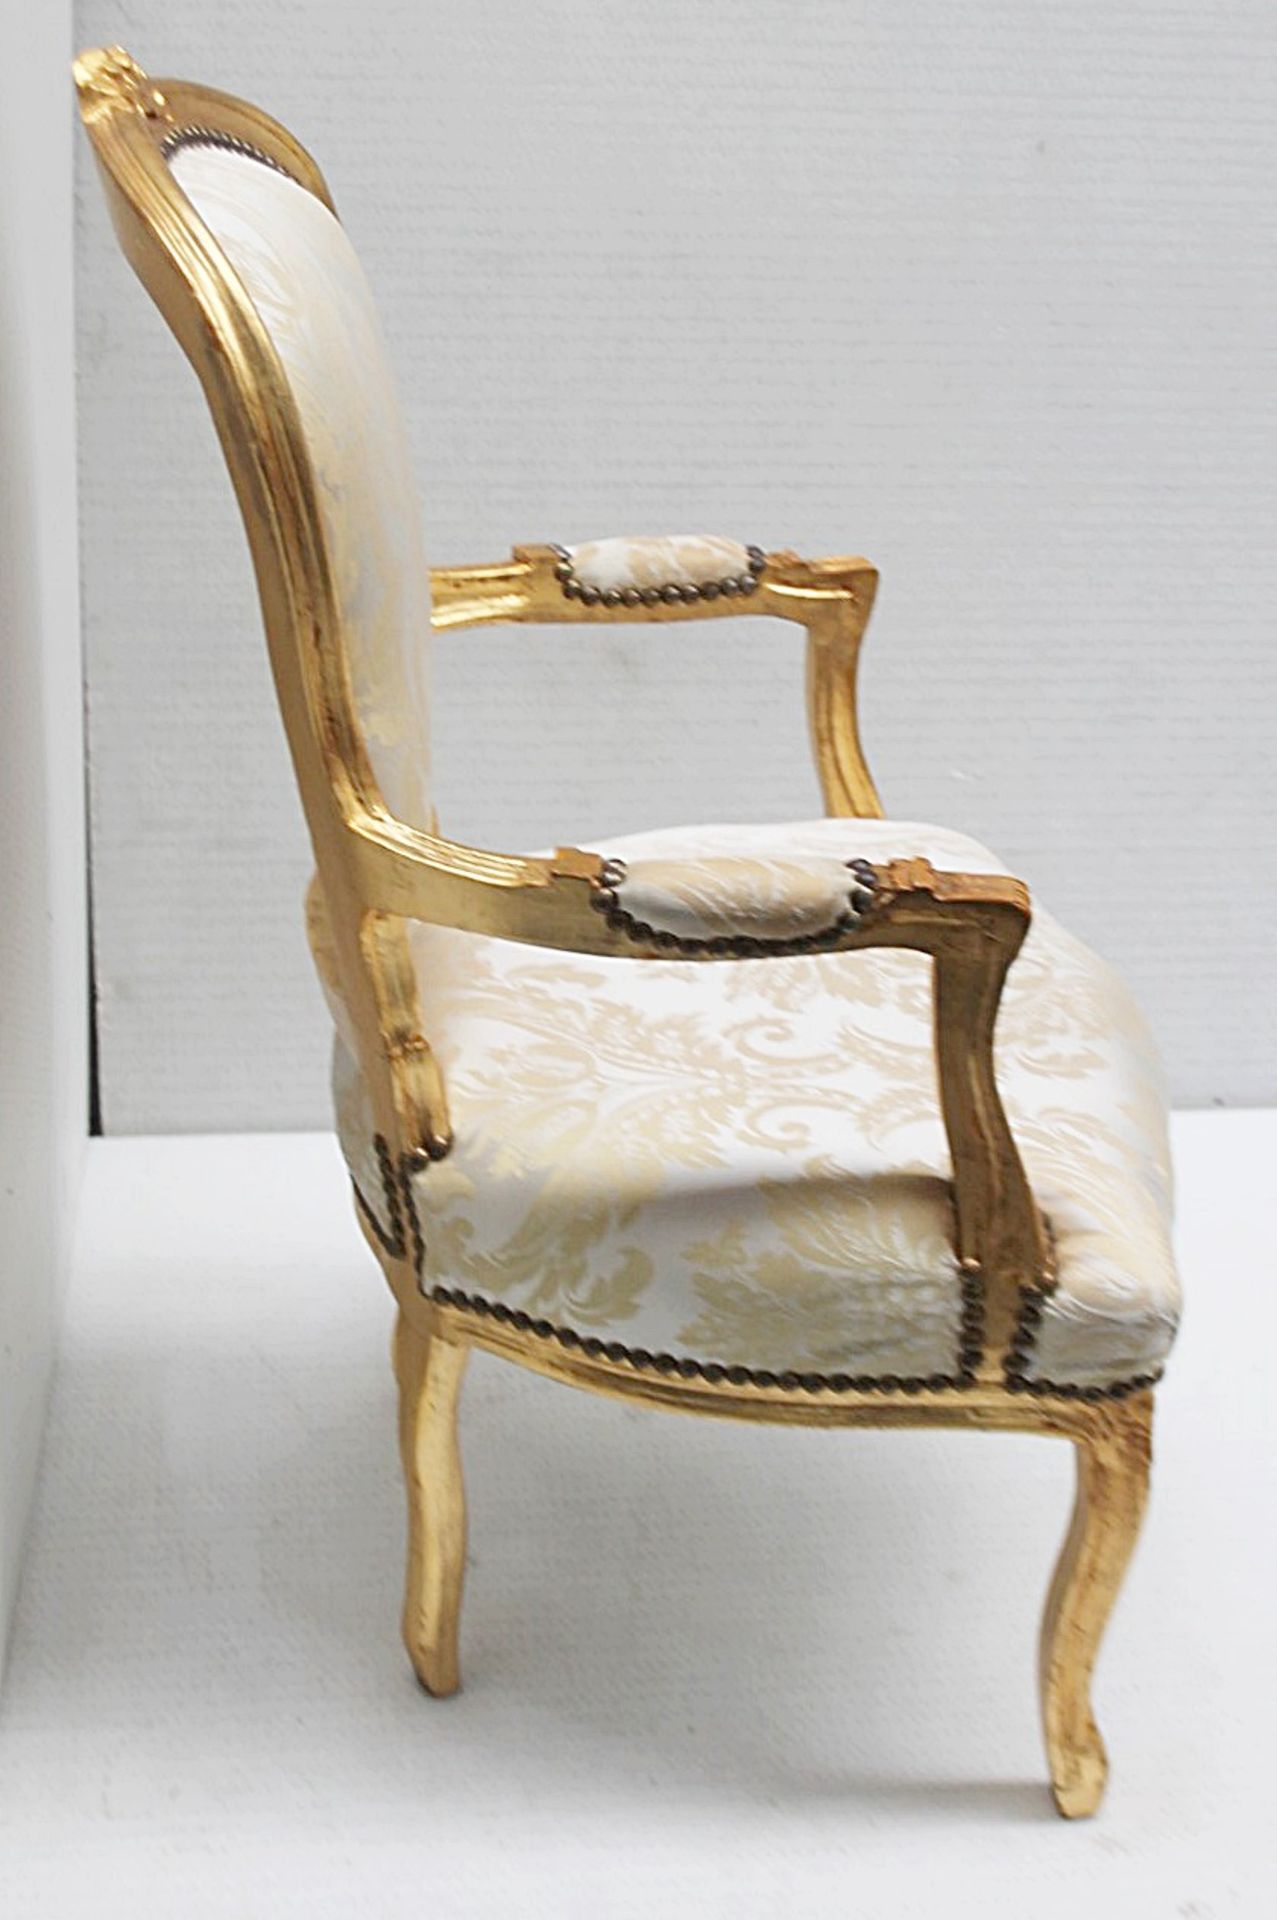 1 x Regency-Style Upholstered Chair In Gold & Silver With Ornate Carved Detailing - Recently Removed - Image 4 of 11